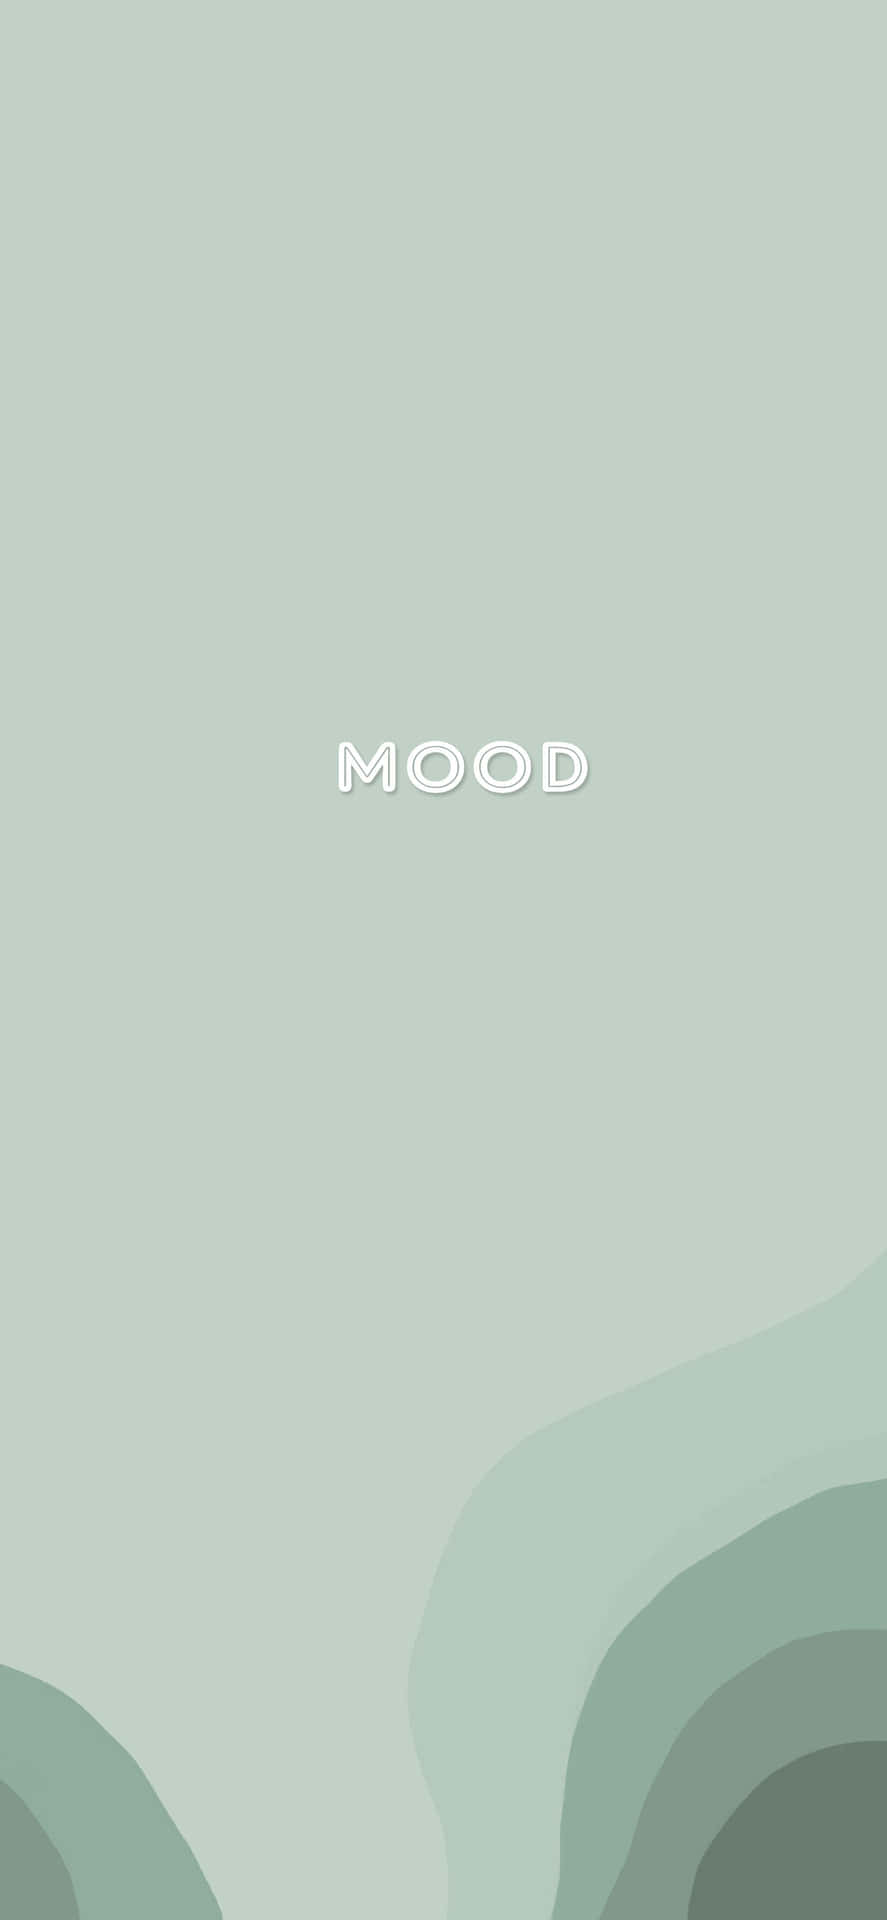 Download Mood - A Green And White Background With The Word Mood ...